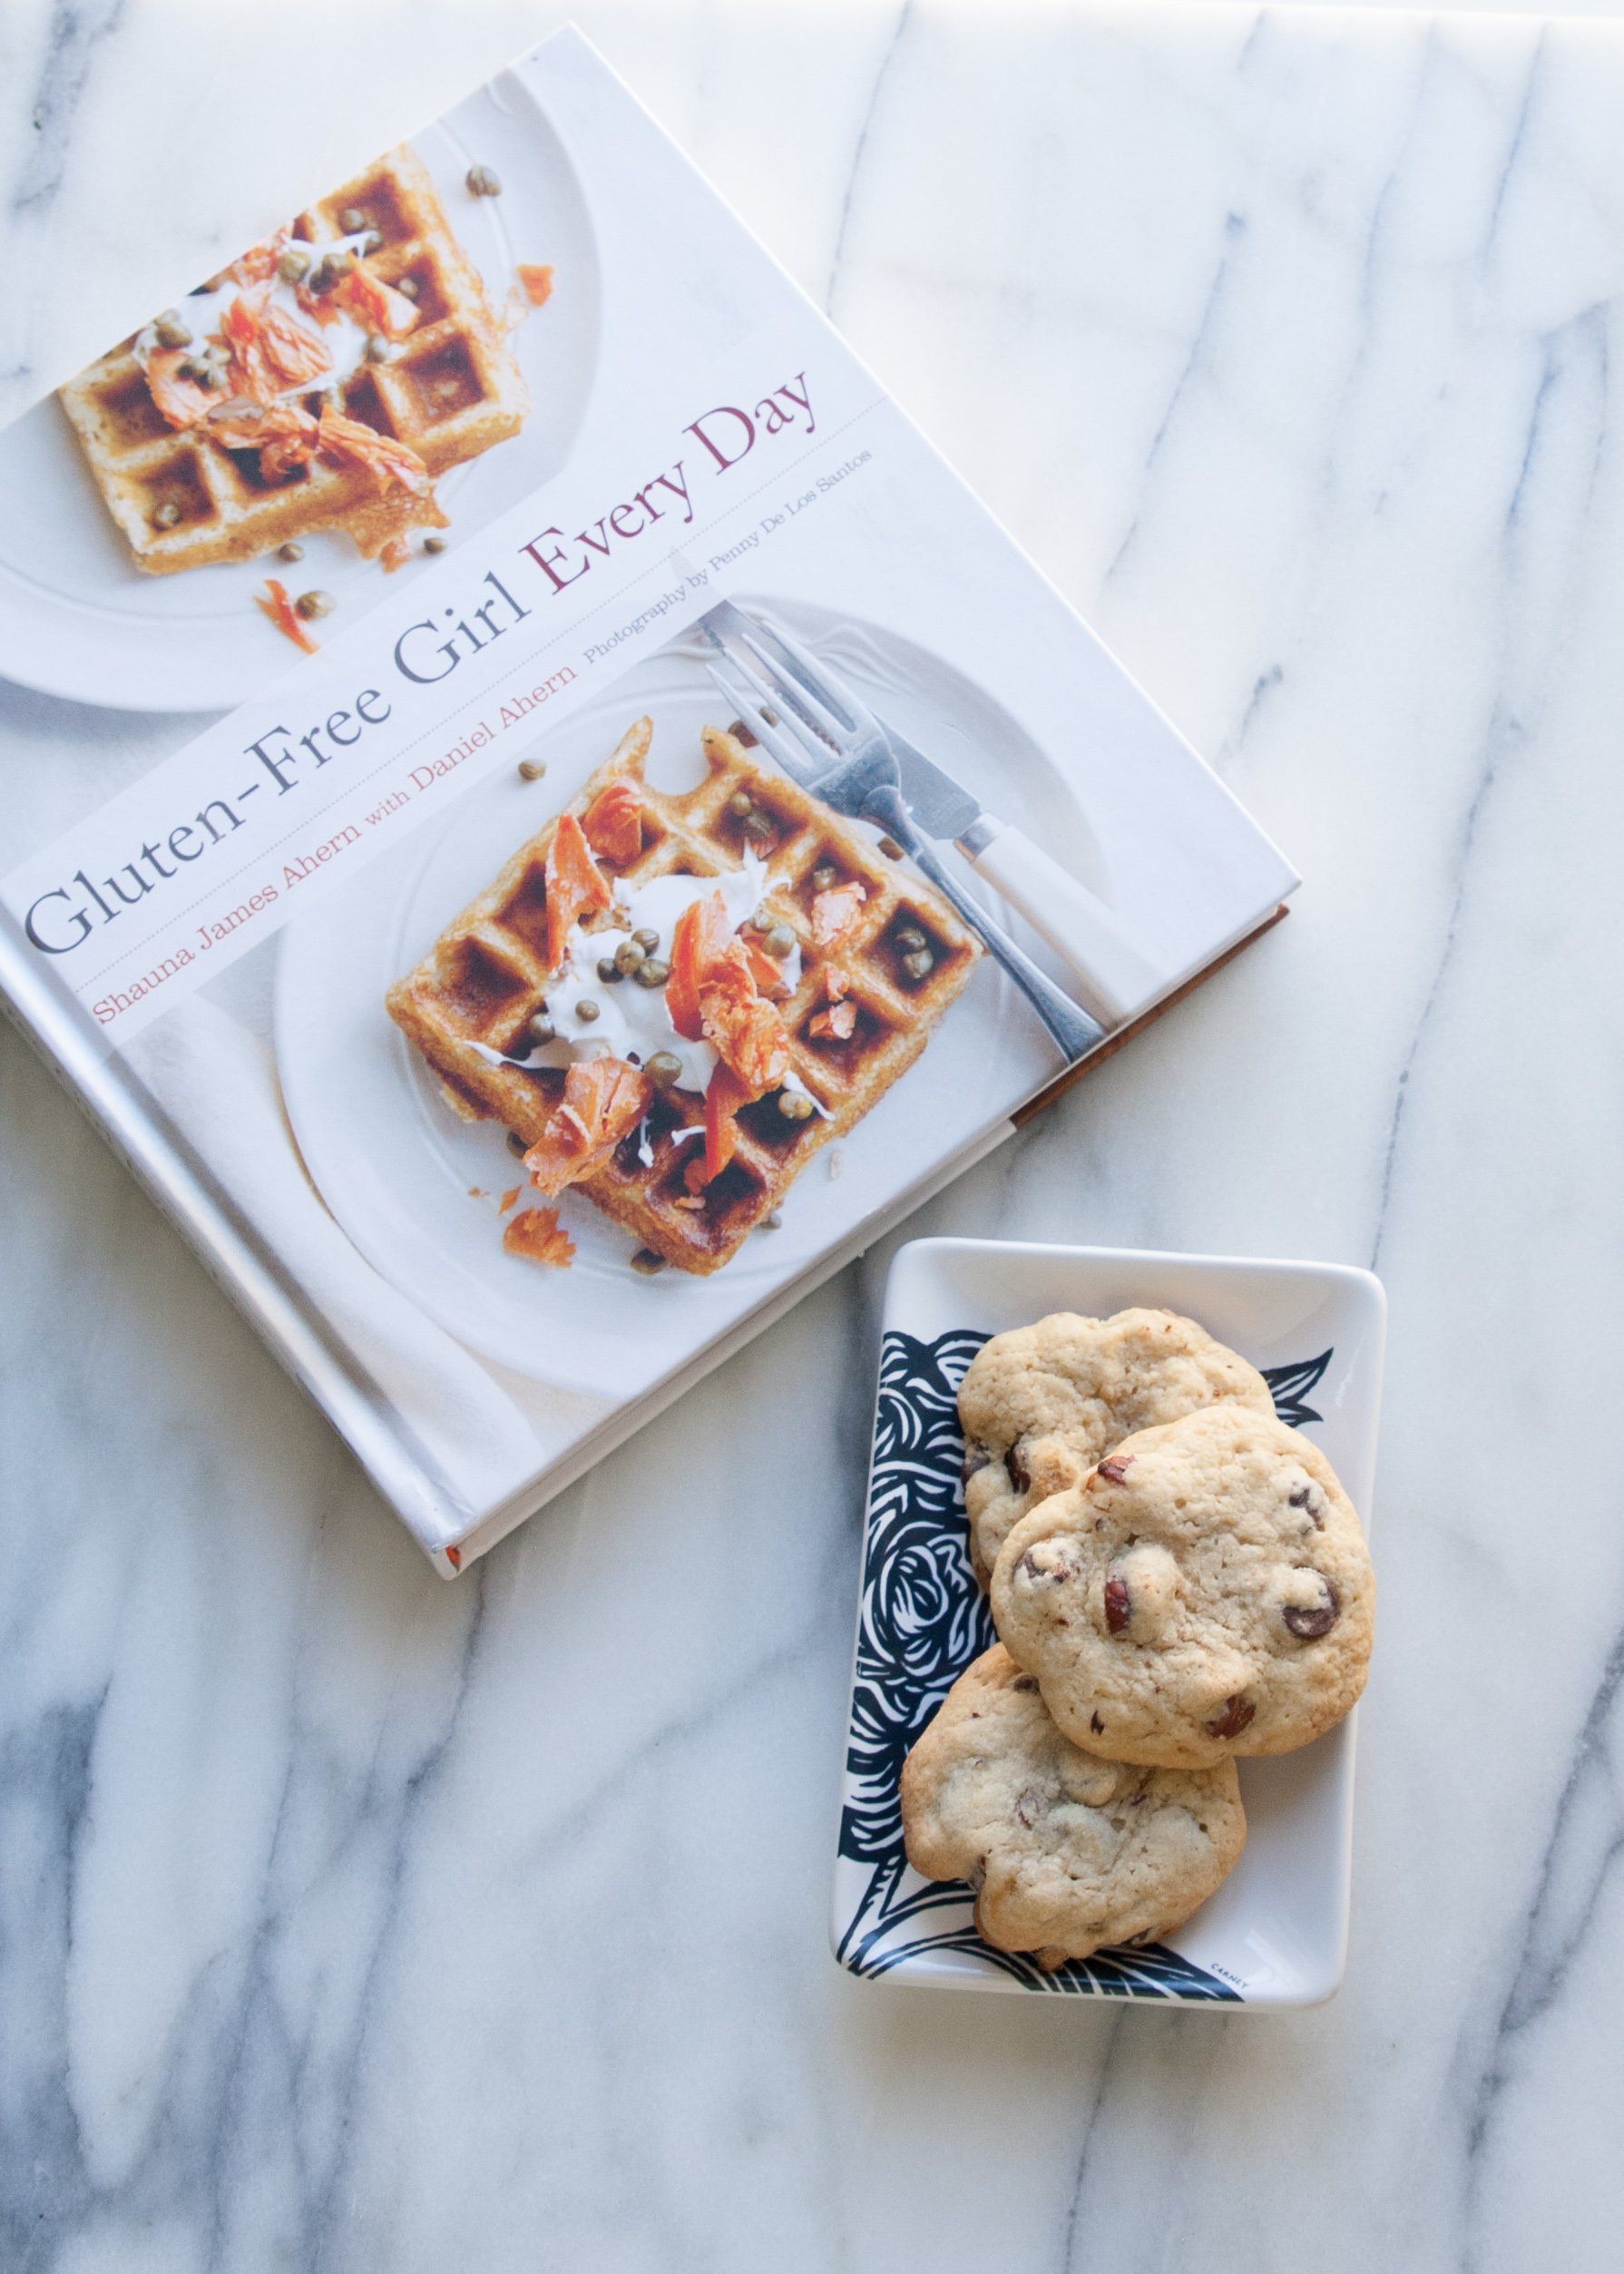 Chocolate Chip Cookies with Hazelnuts - Gluten-Free Girl Everyday